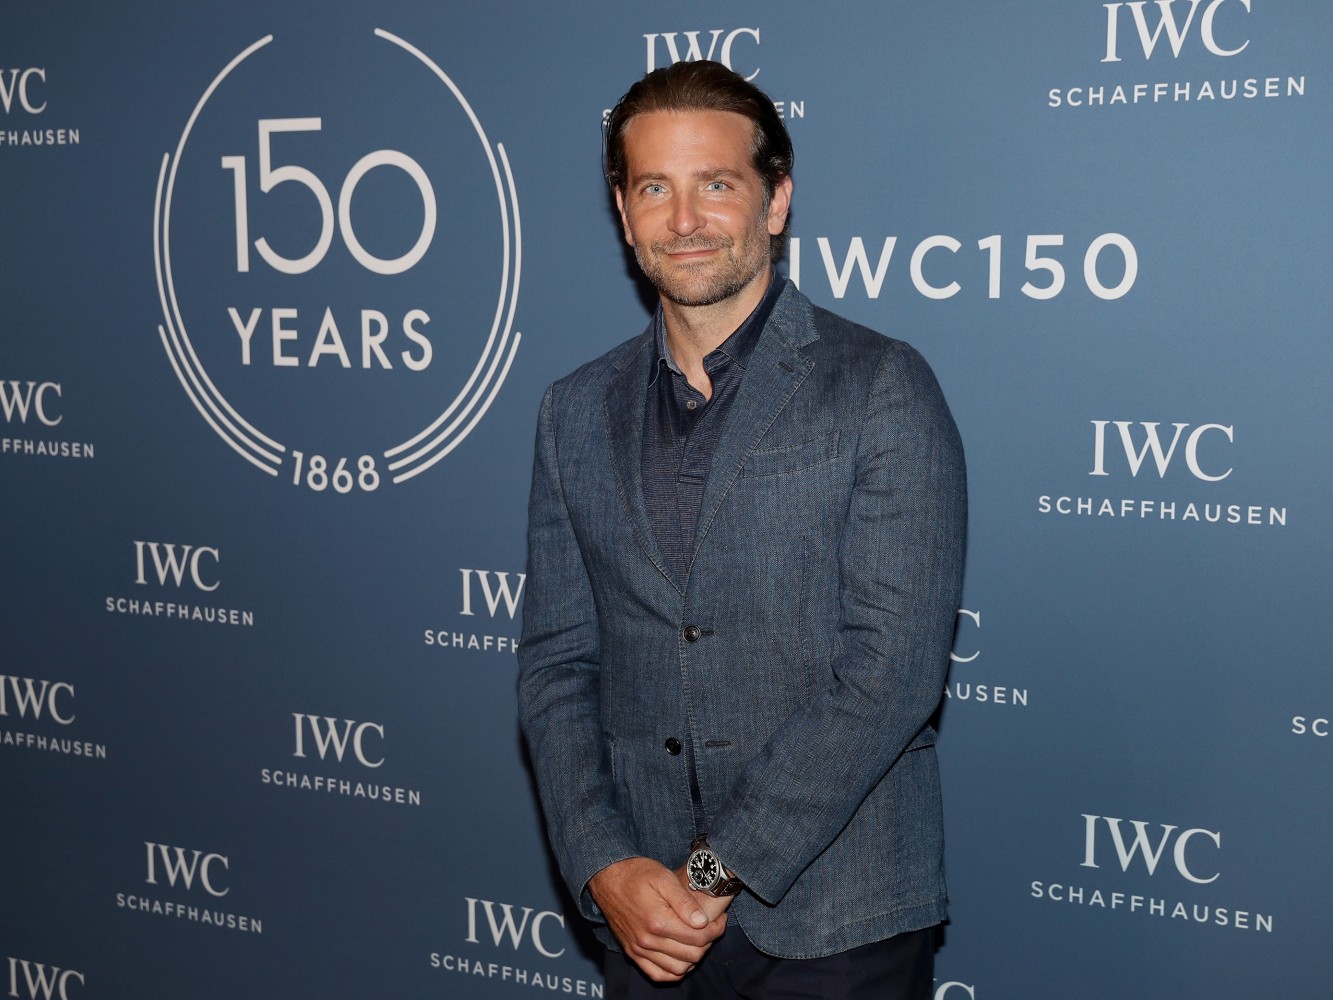 Bradley Cooper Takes Center Stage As IWC’s New Ambassador At 150th Birthday Extravaganza